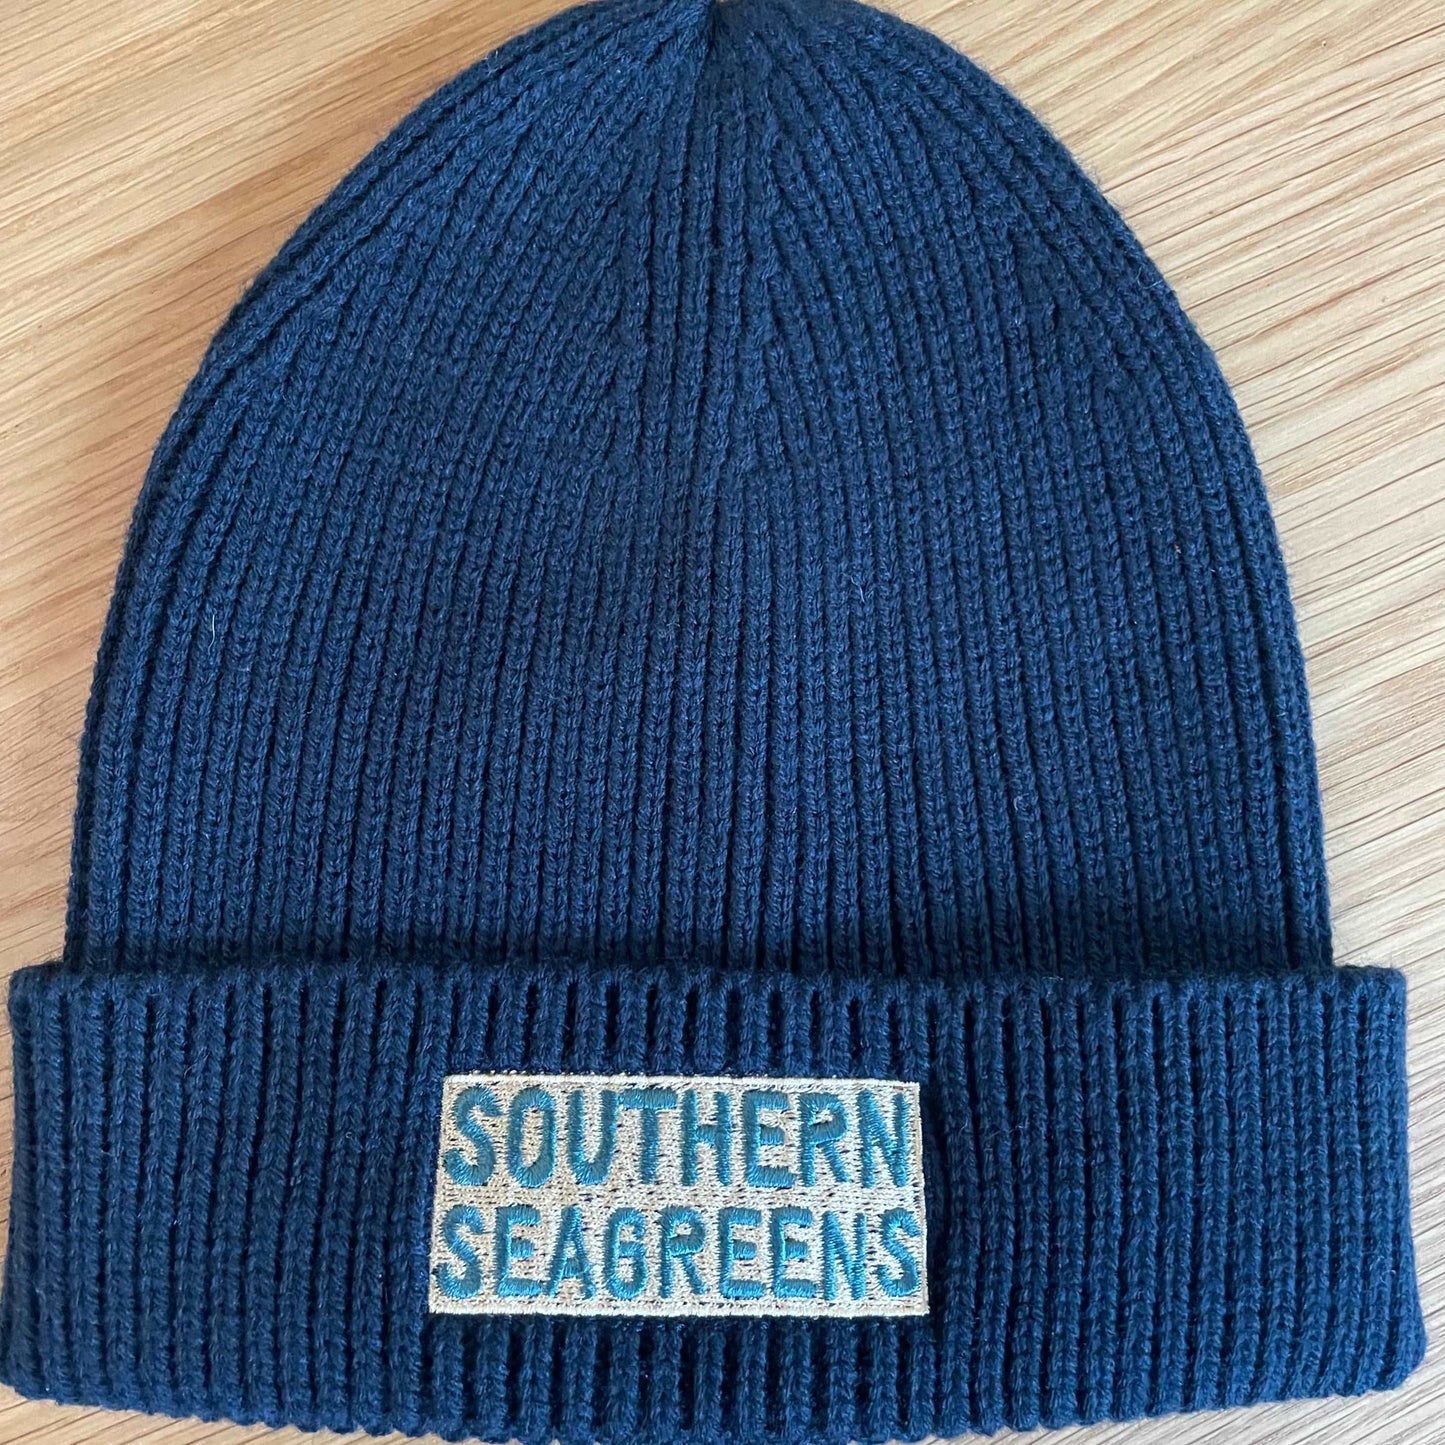 Seadog Beanie-Southern Seagreens-navy-Southern Seagreens